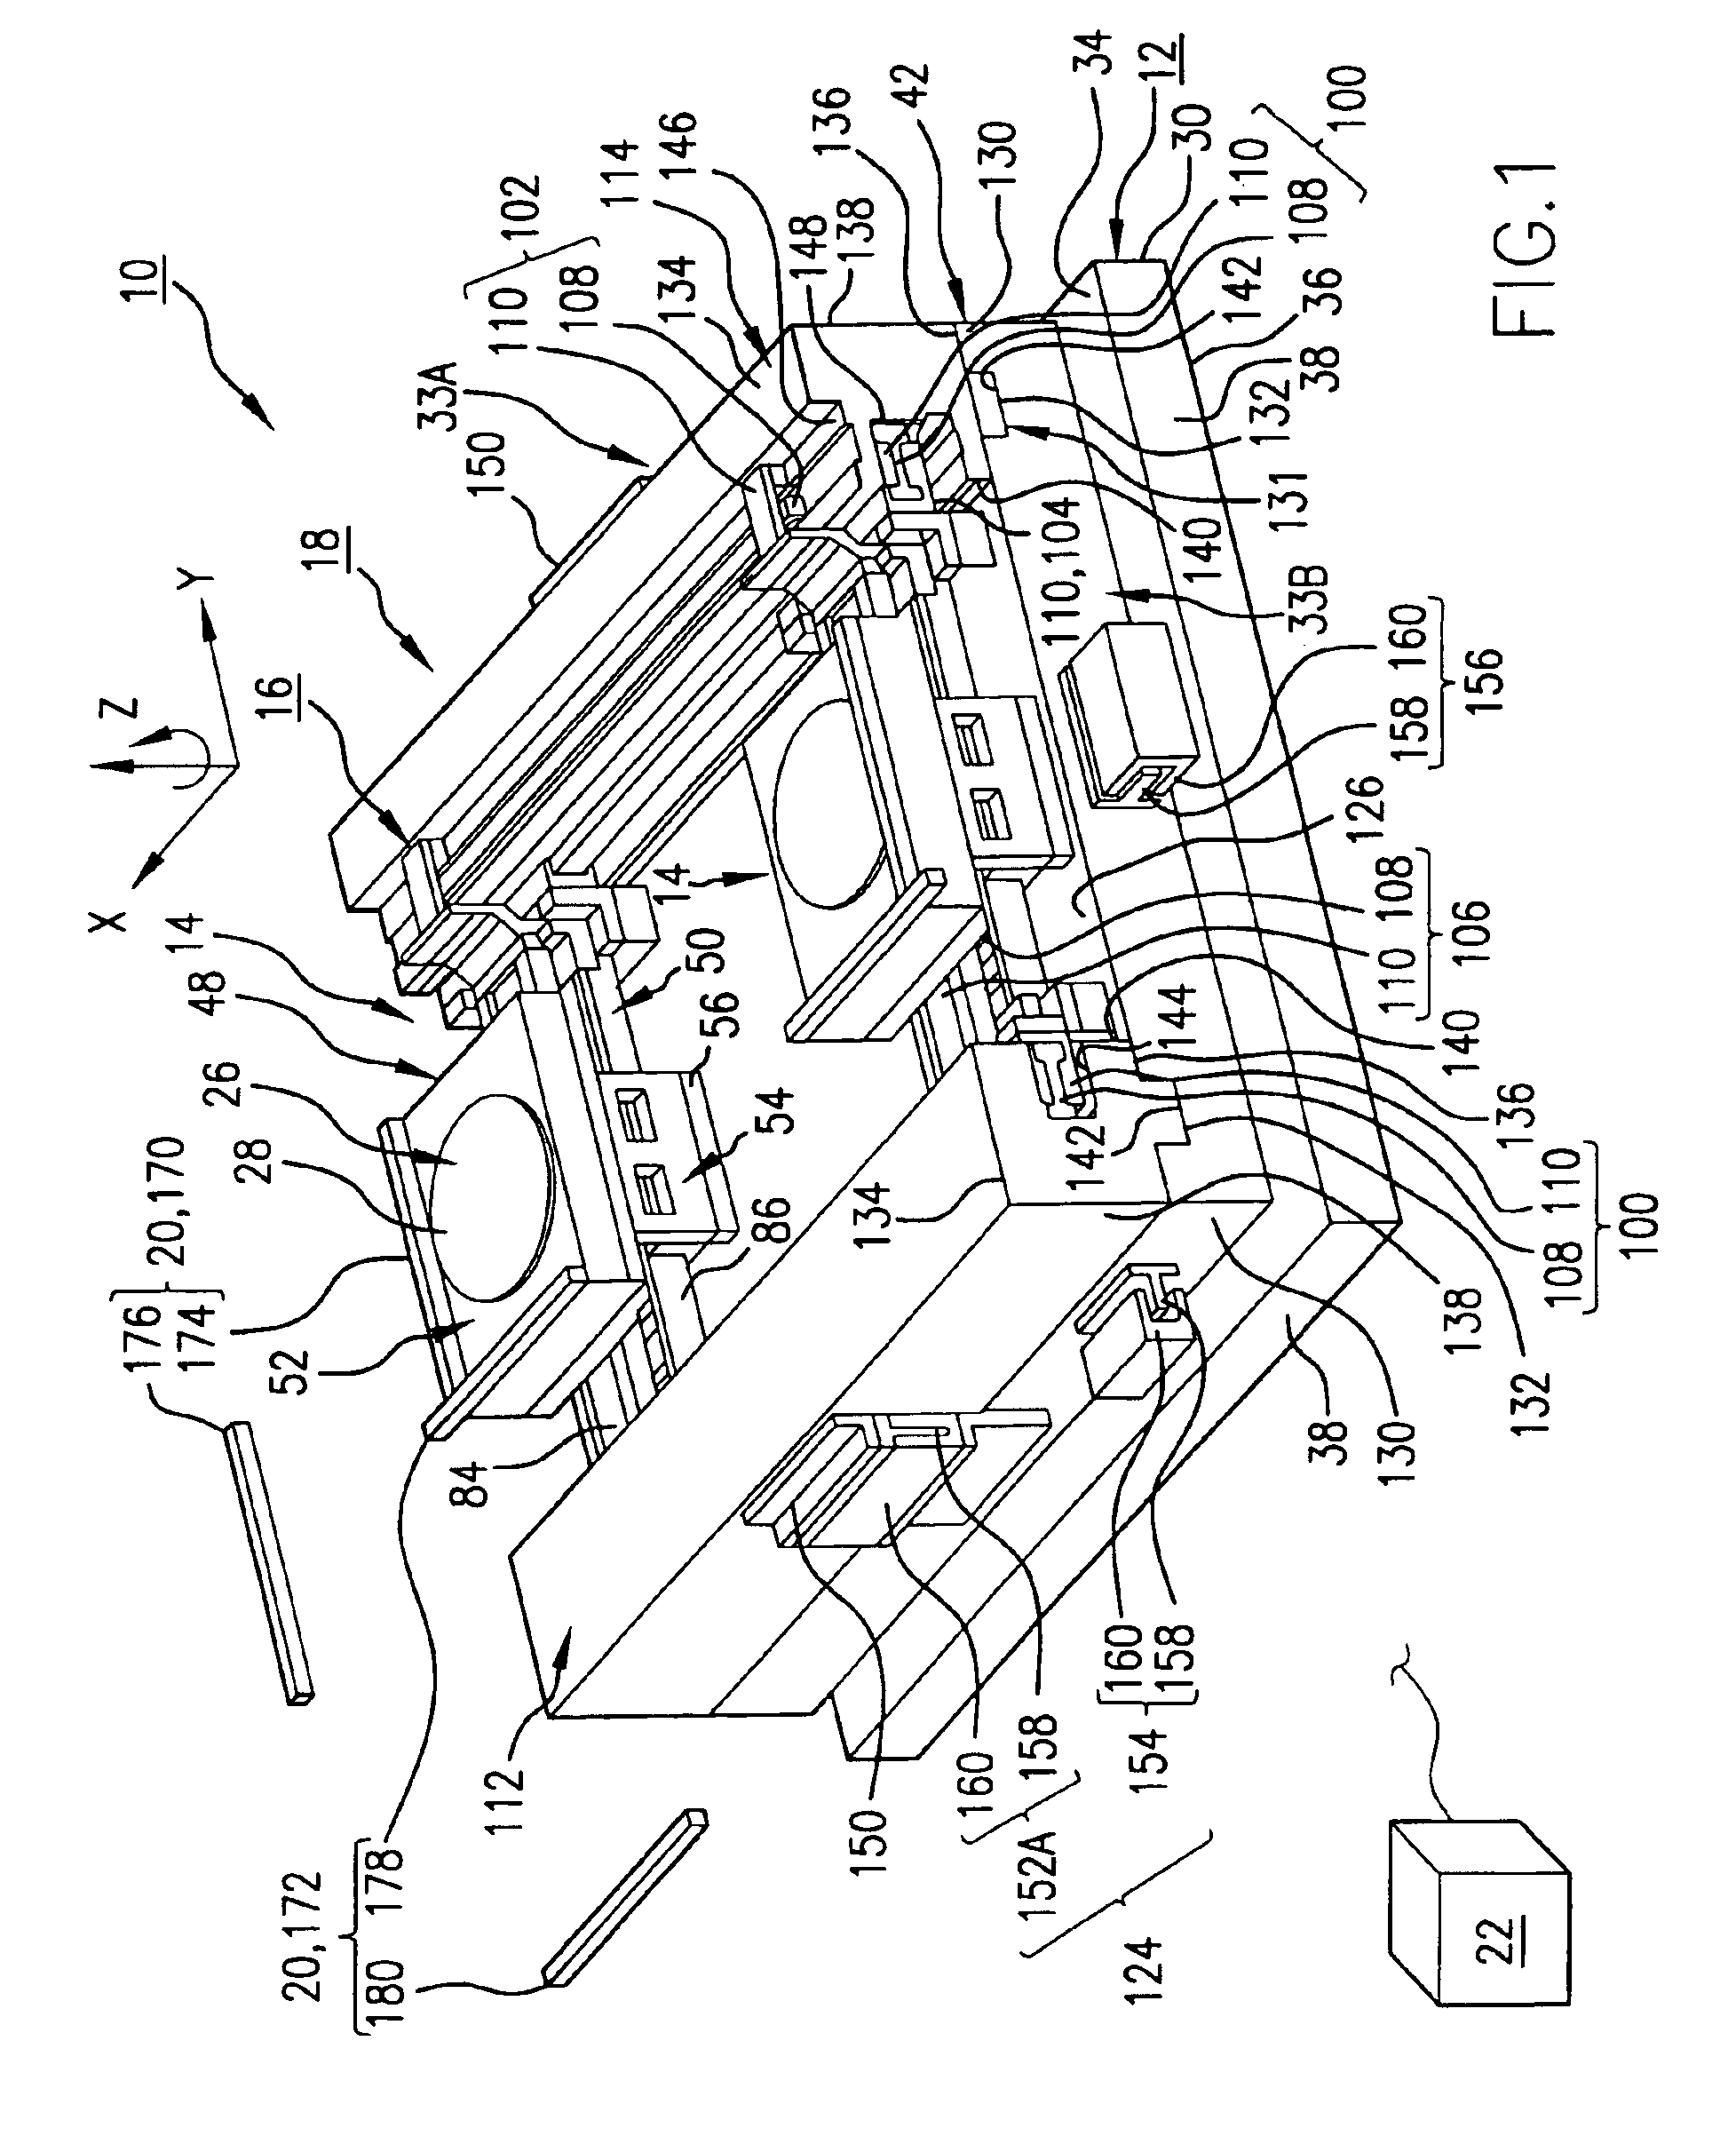 System and method for resetting a reaction mass assembly of a stage assembly